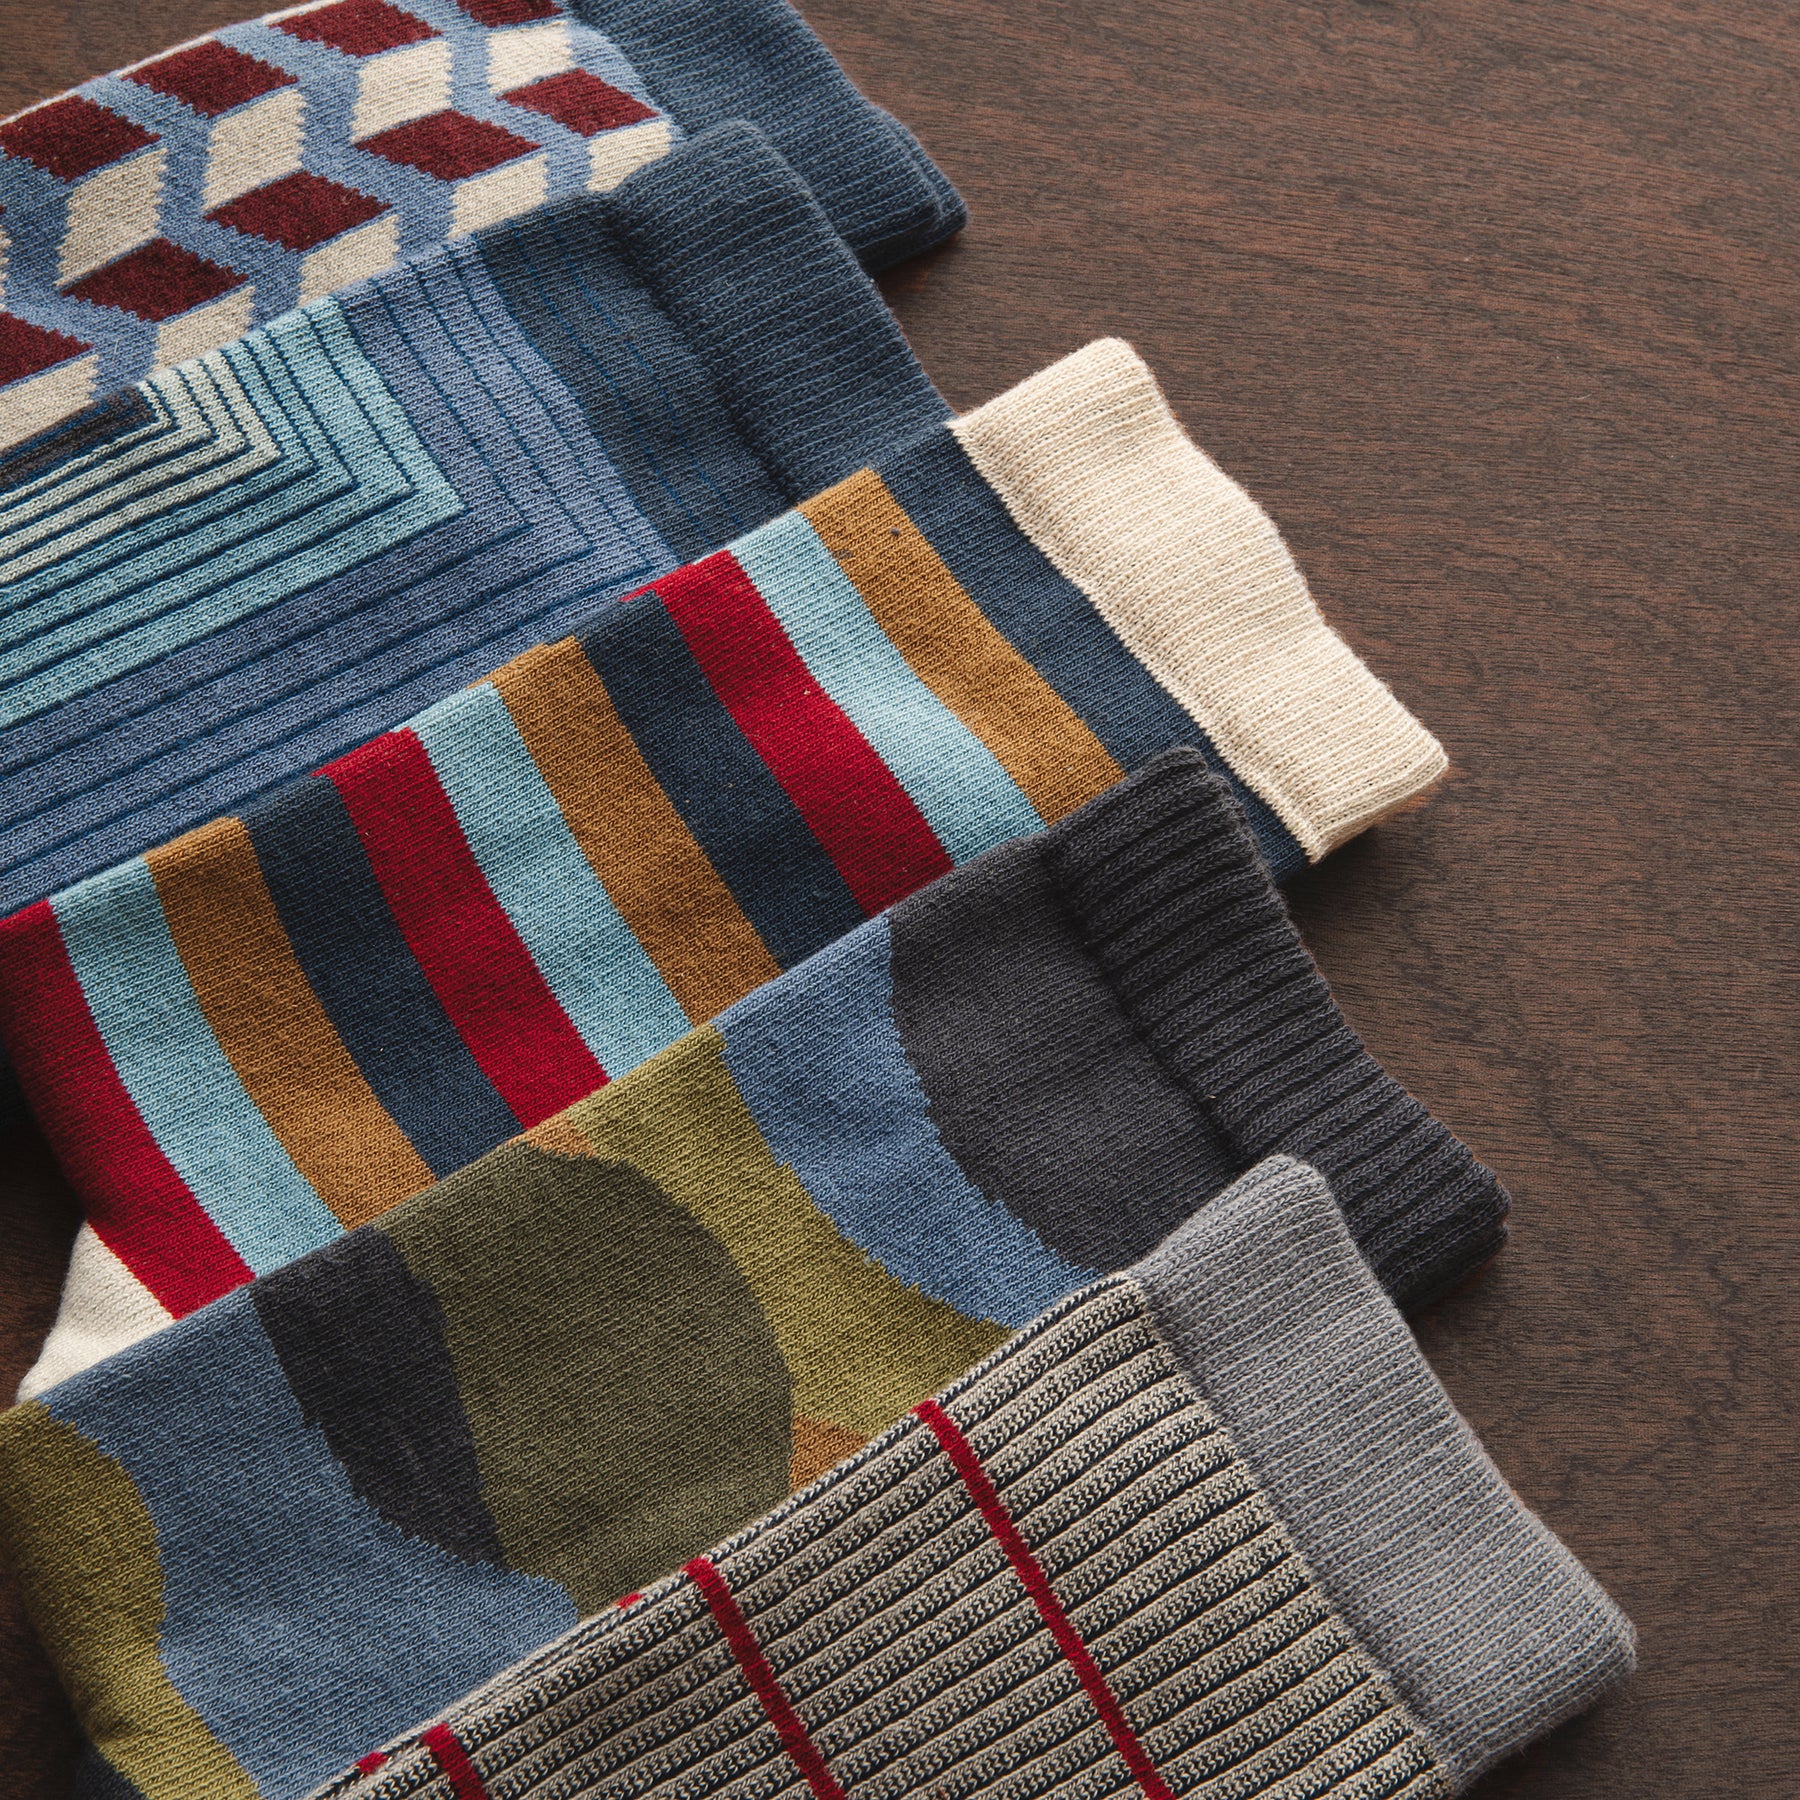 stripe patterned organic cotton socks laying on a wooden surface